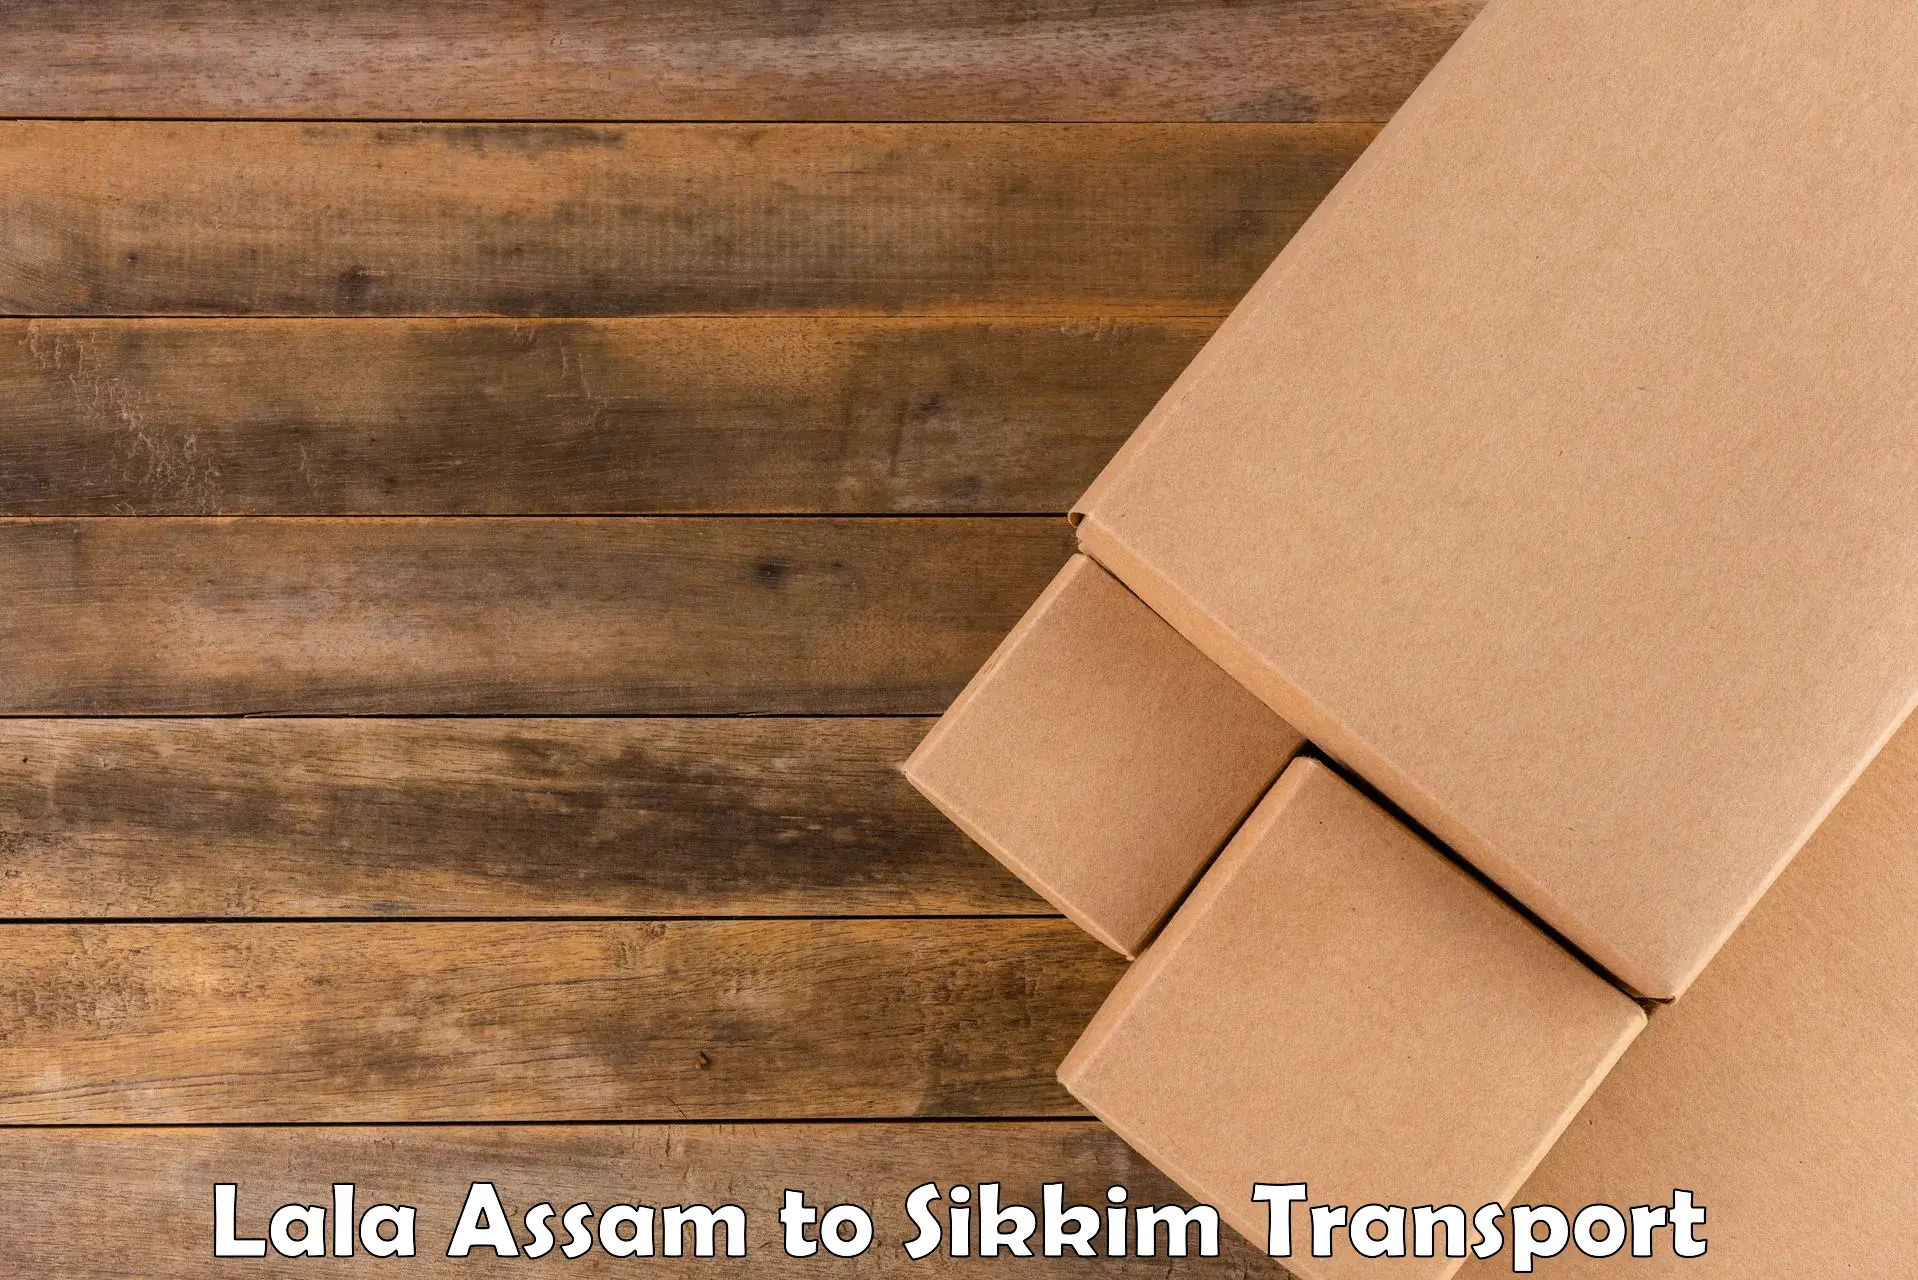 Road transport online services in Lala Assam to Gangtok